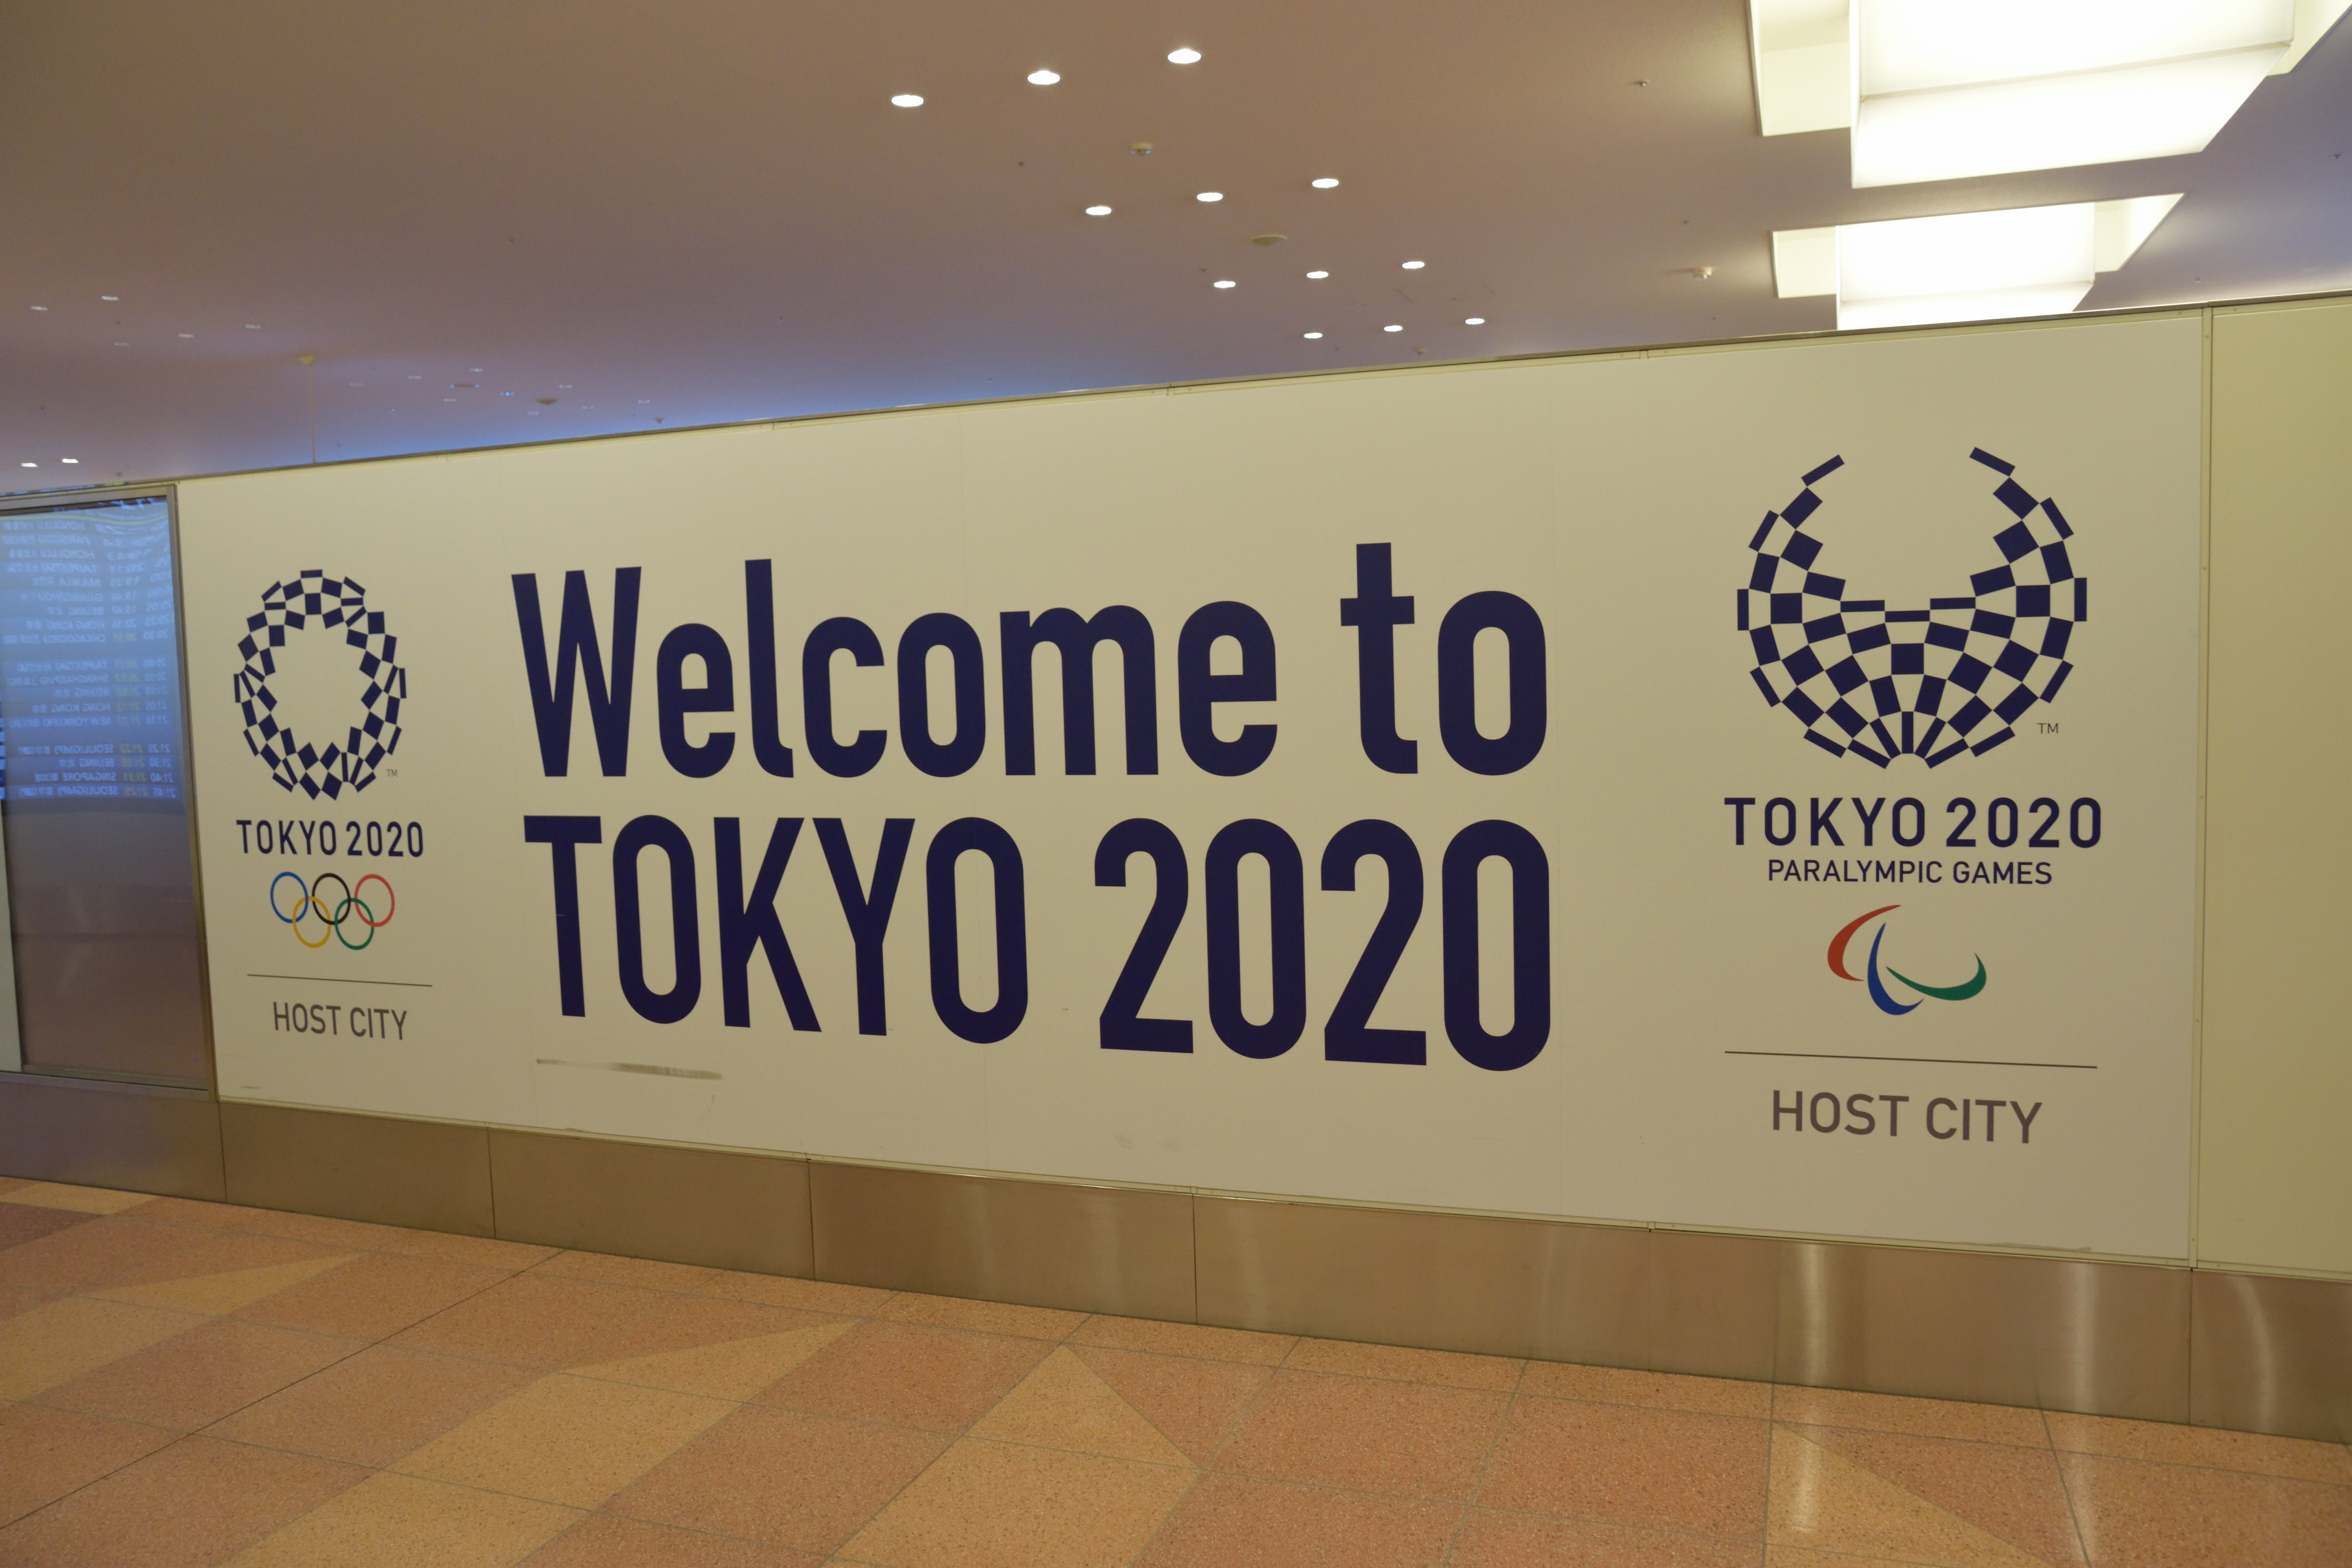 Welcome to TOKYO 2020の看板